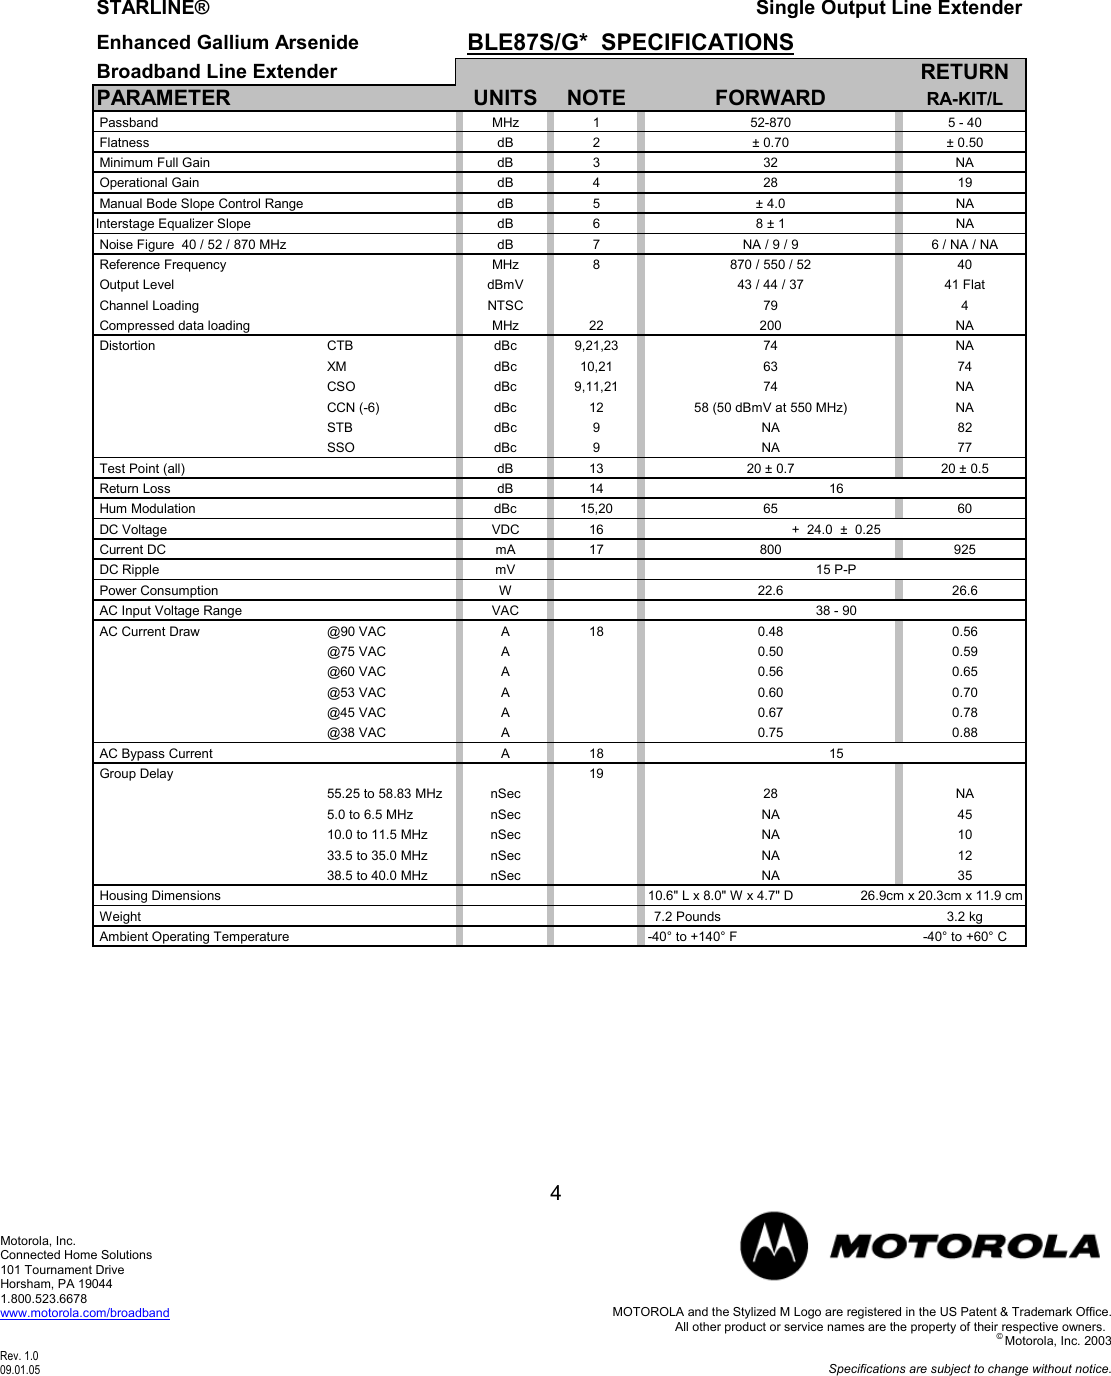 Page 4 of 9 - Motorola Motorola-Ble87-Users-Manual BLE_Catalog_Specifications_9-1-05